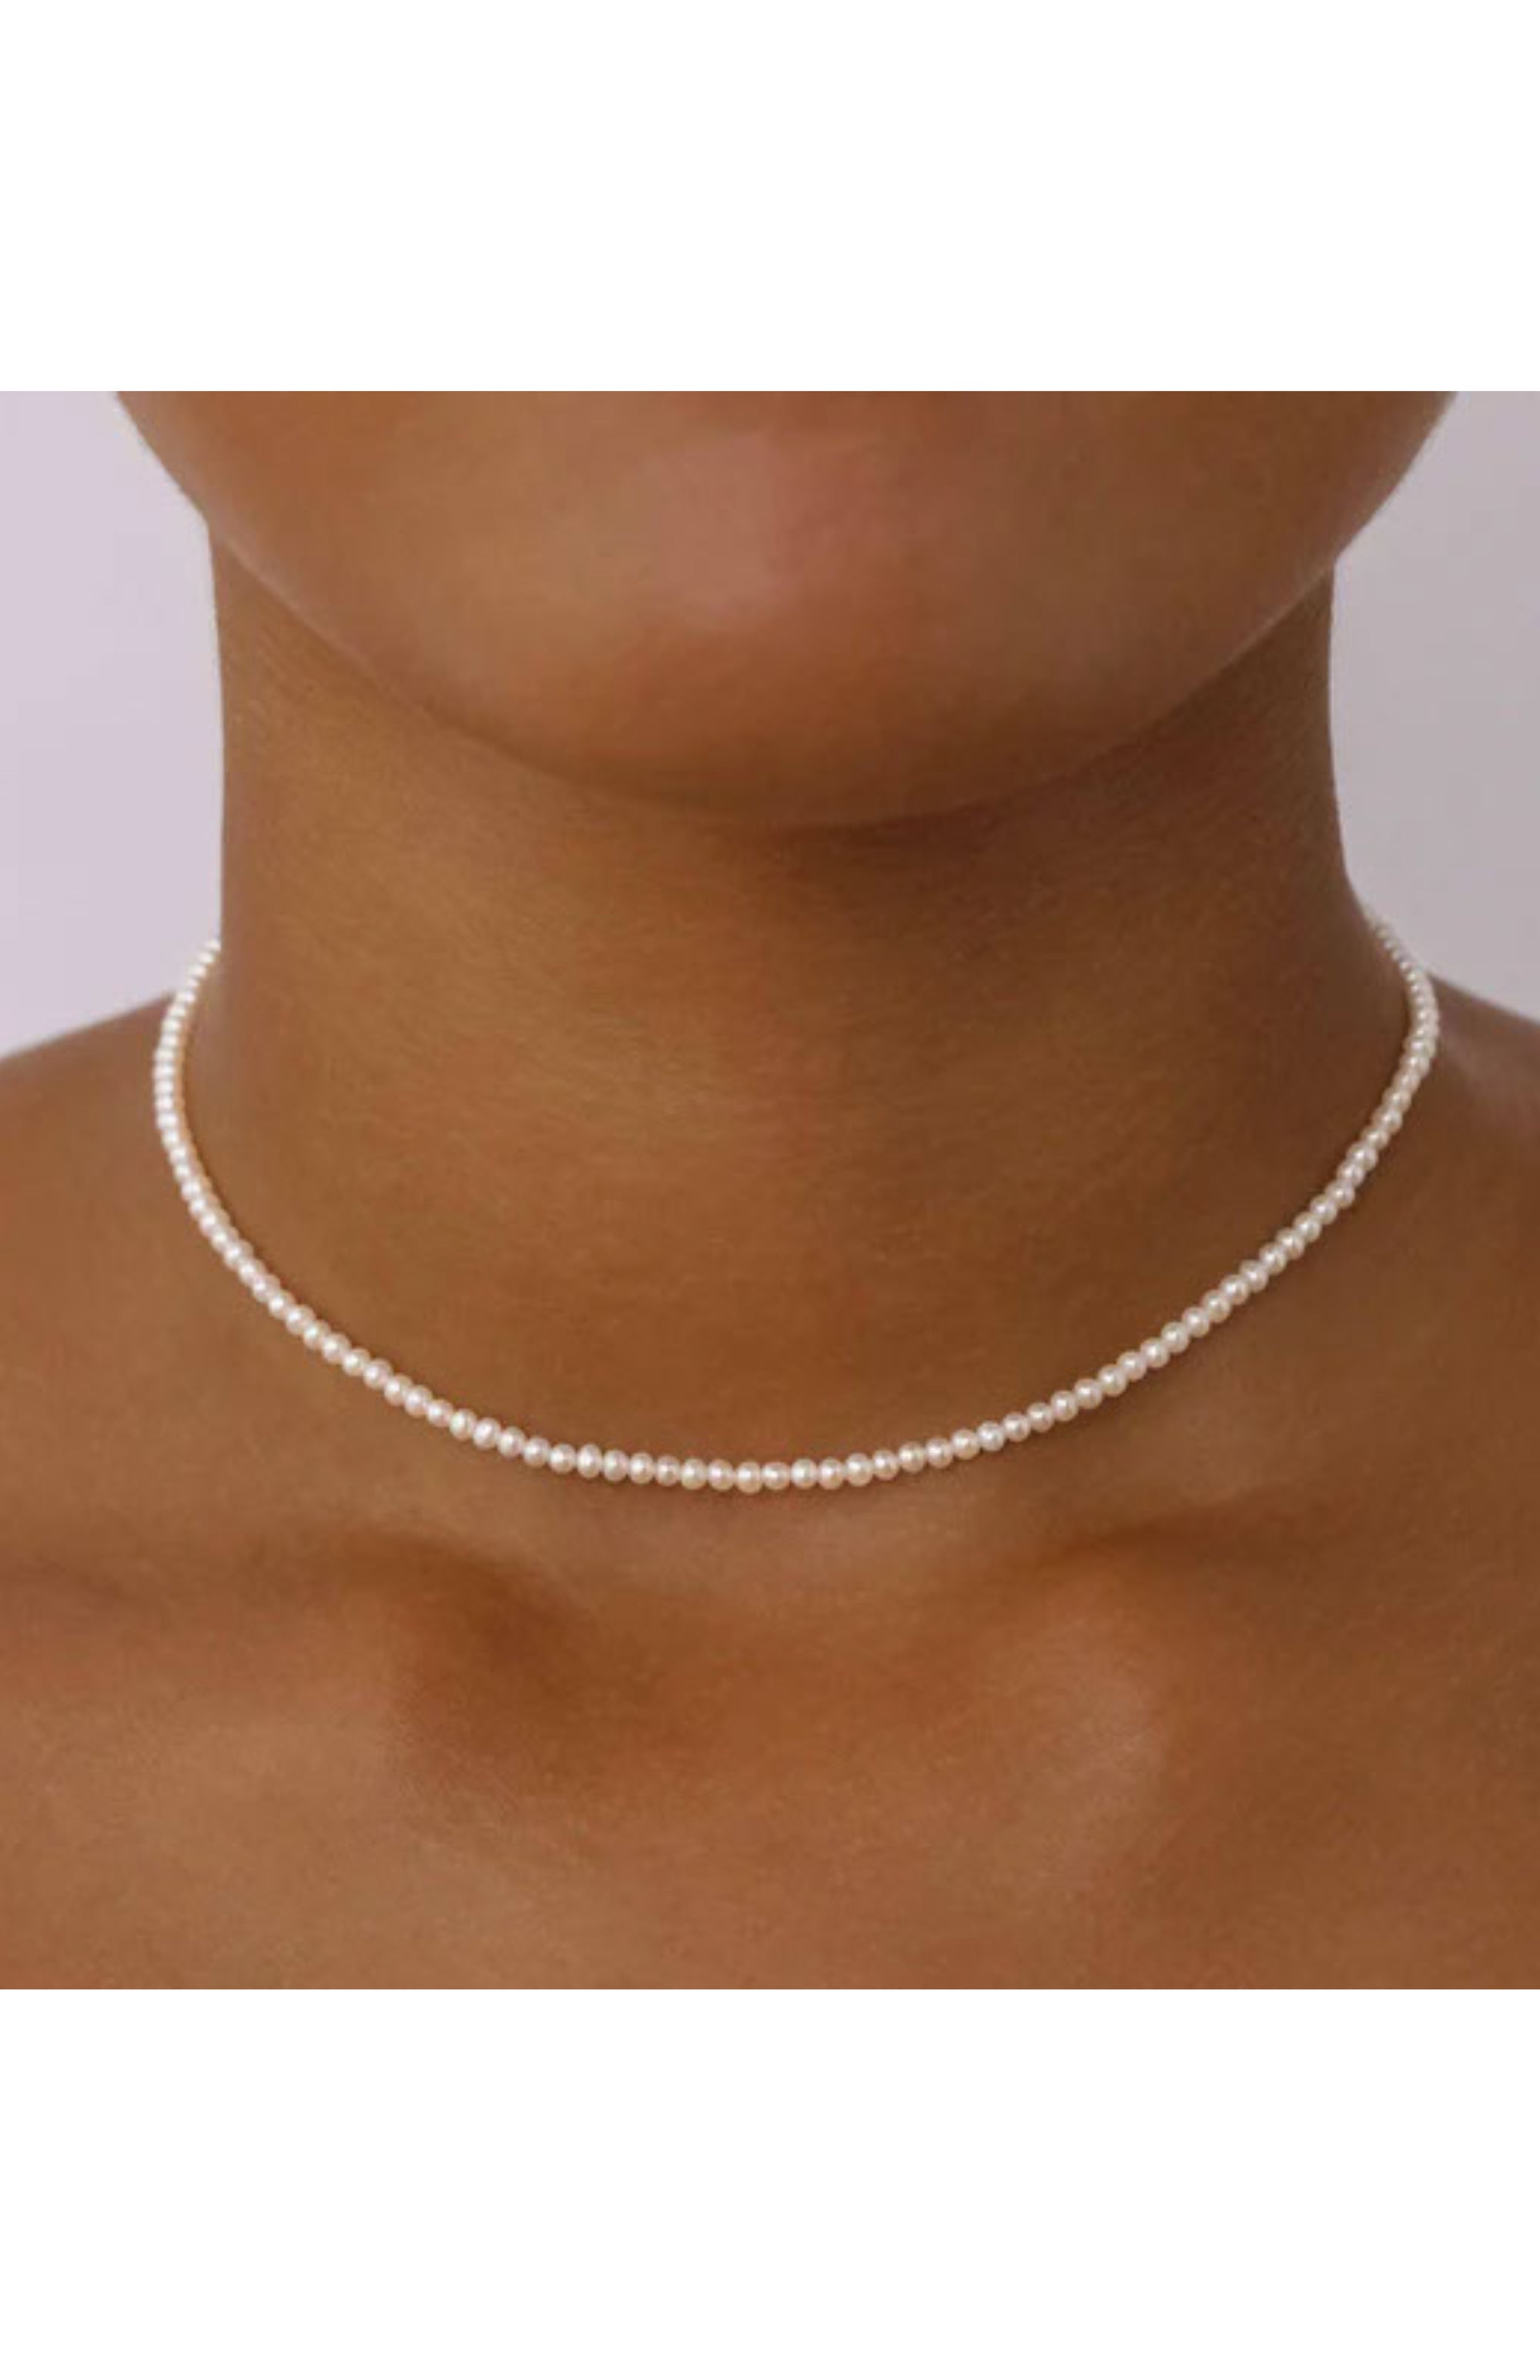 Live in Peace Pearl Choker - Gold